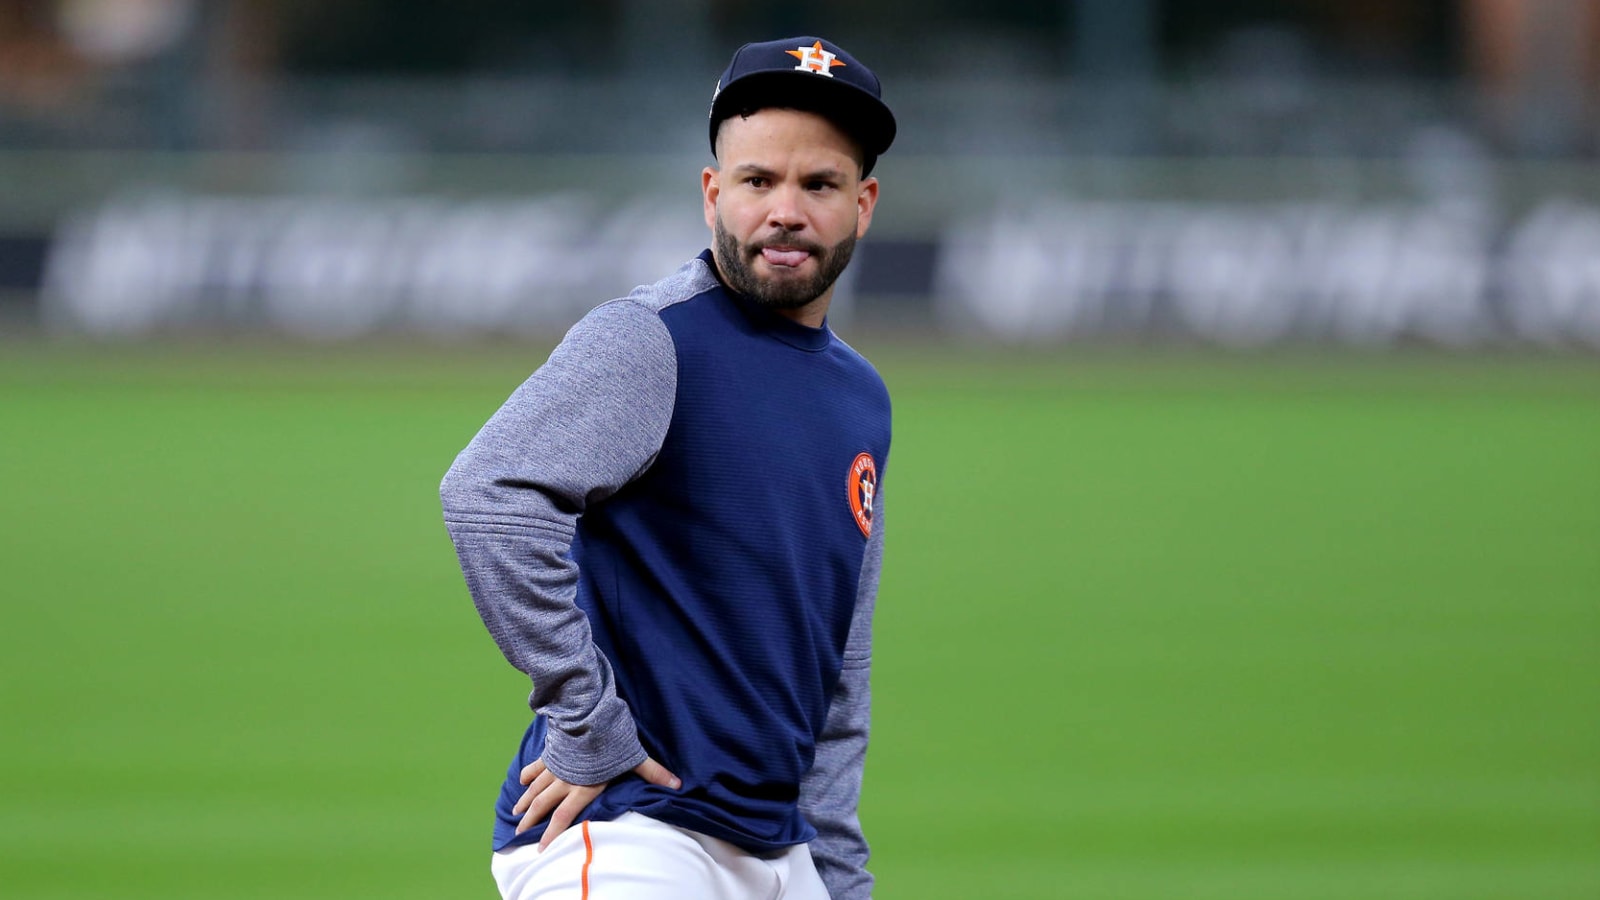 Ken Rosenthal shares thoughts on Jose Altuve interview that fueled